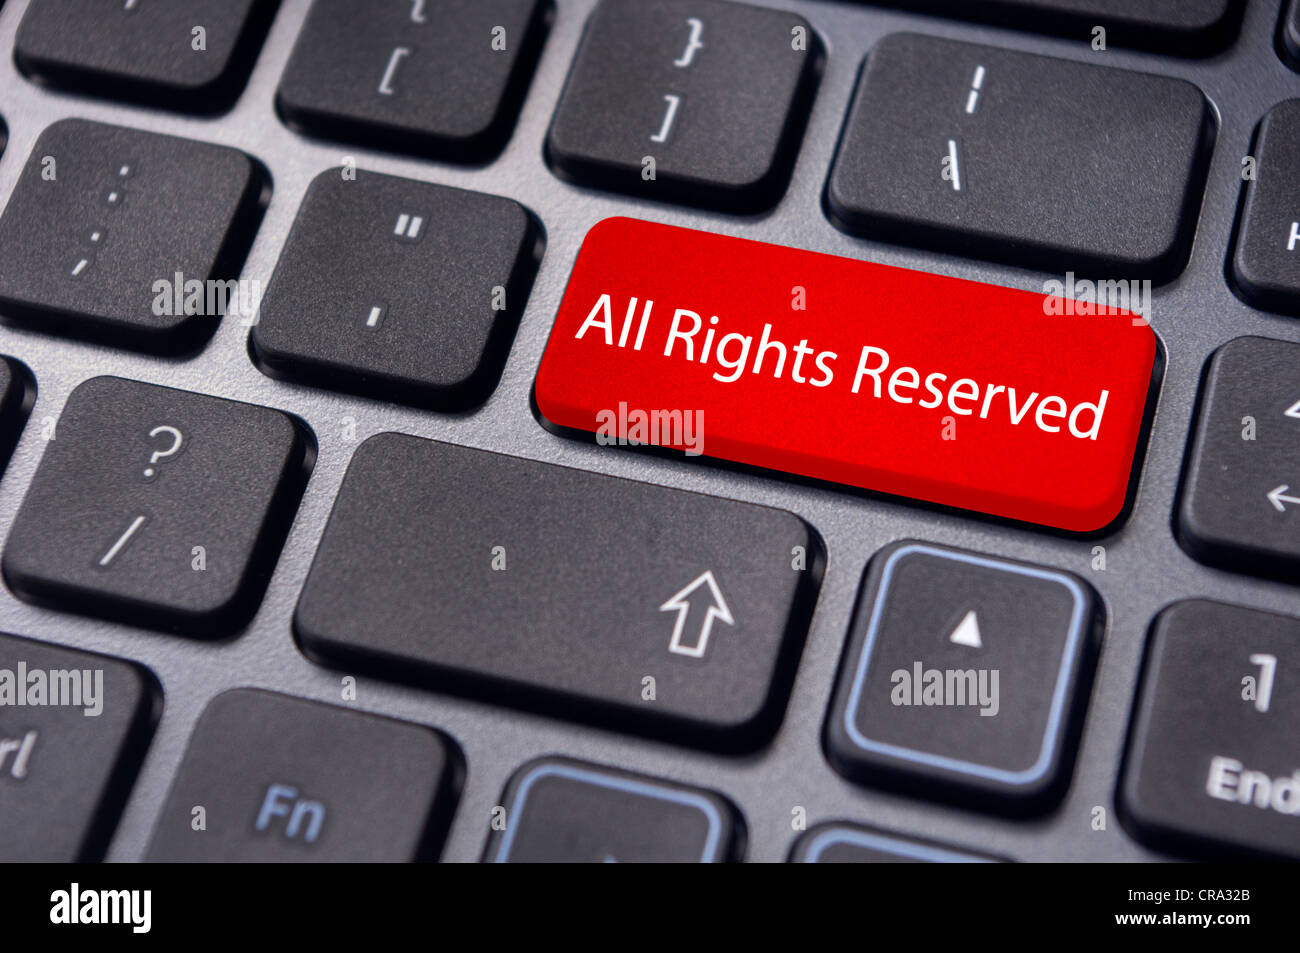 an All Rights Reserved message on keyboard to illustrate the concepts. Stock Photo